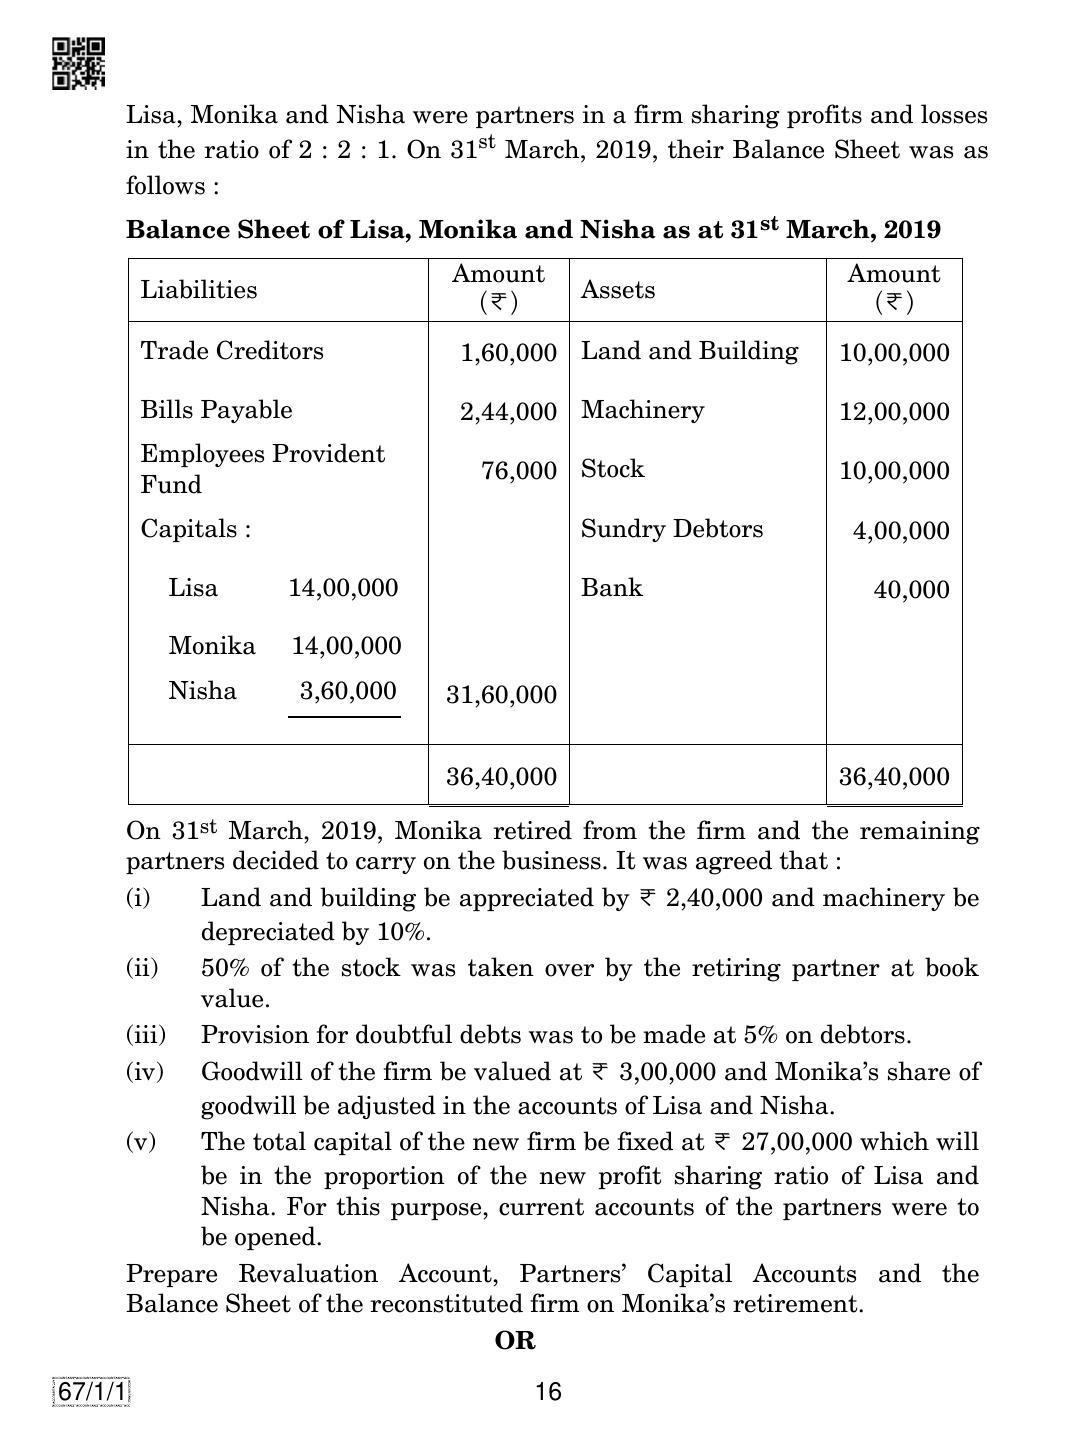 CBSE Class 12 67-1-1 ACCOUNTANCY 2019 Compartment Question Paper - Page 16